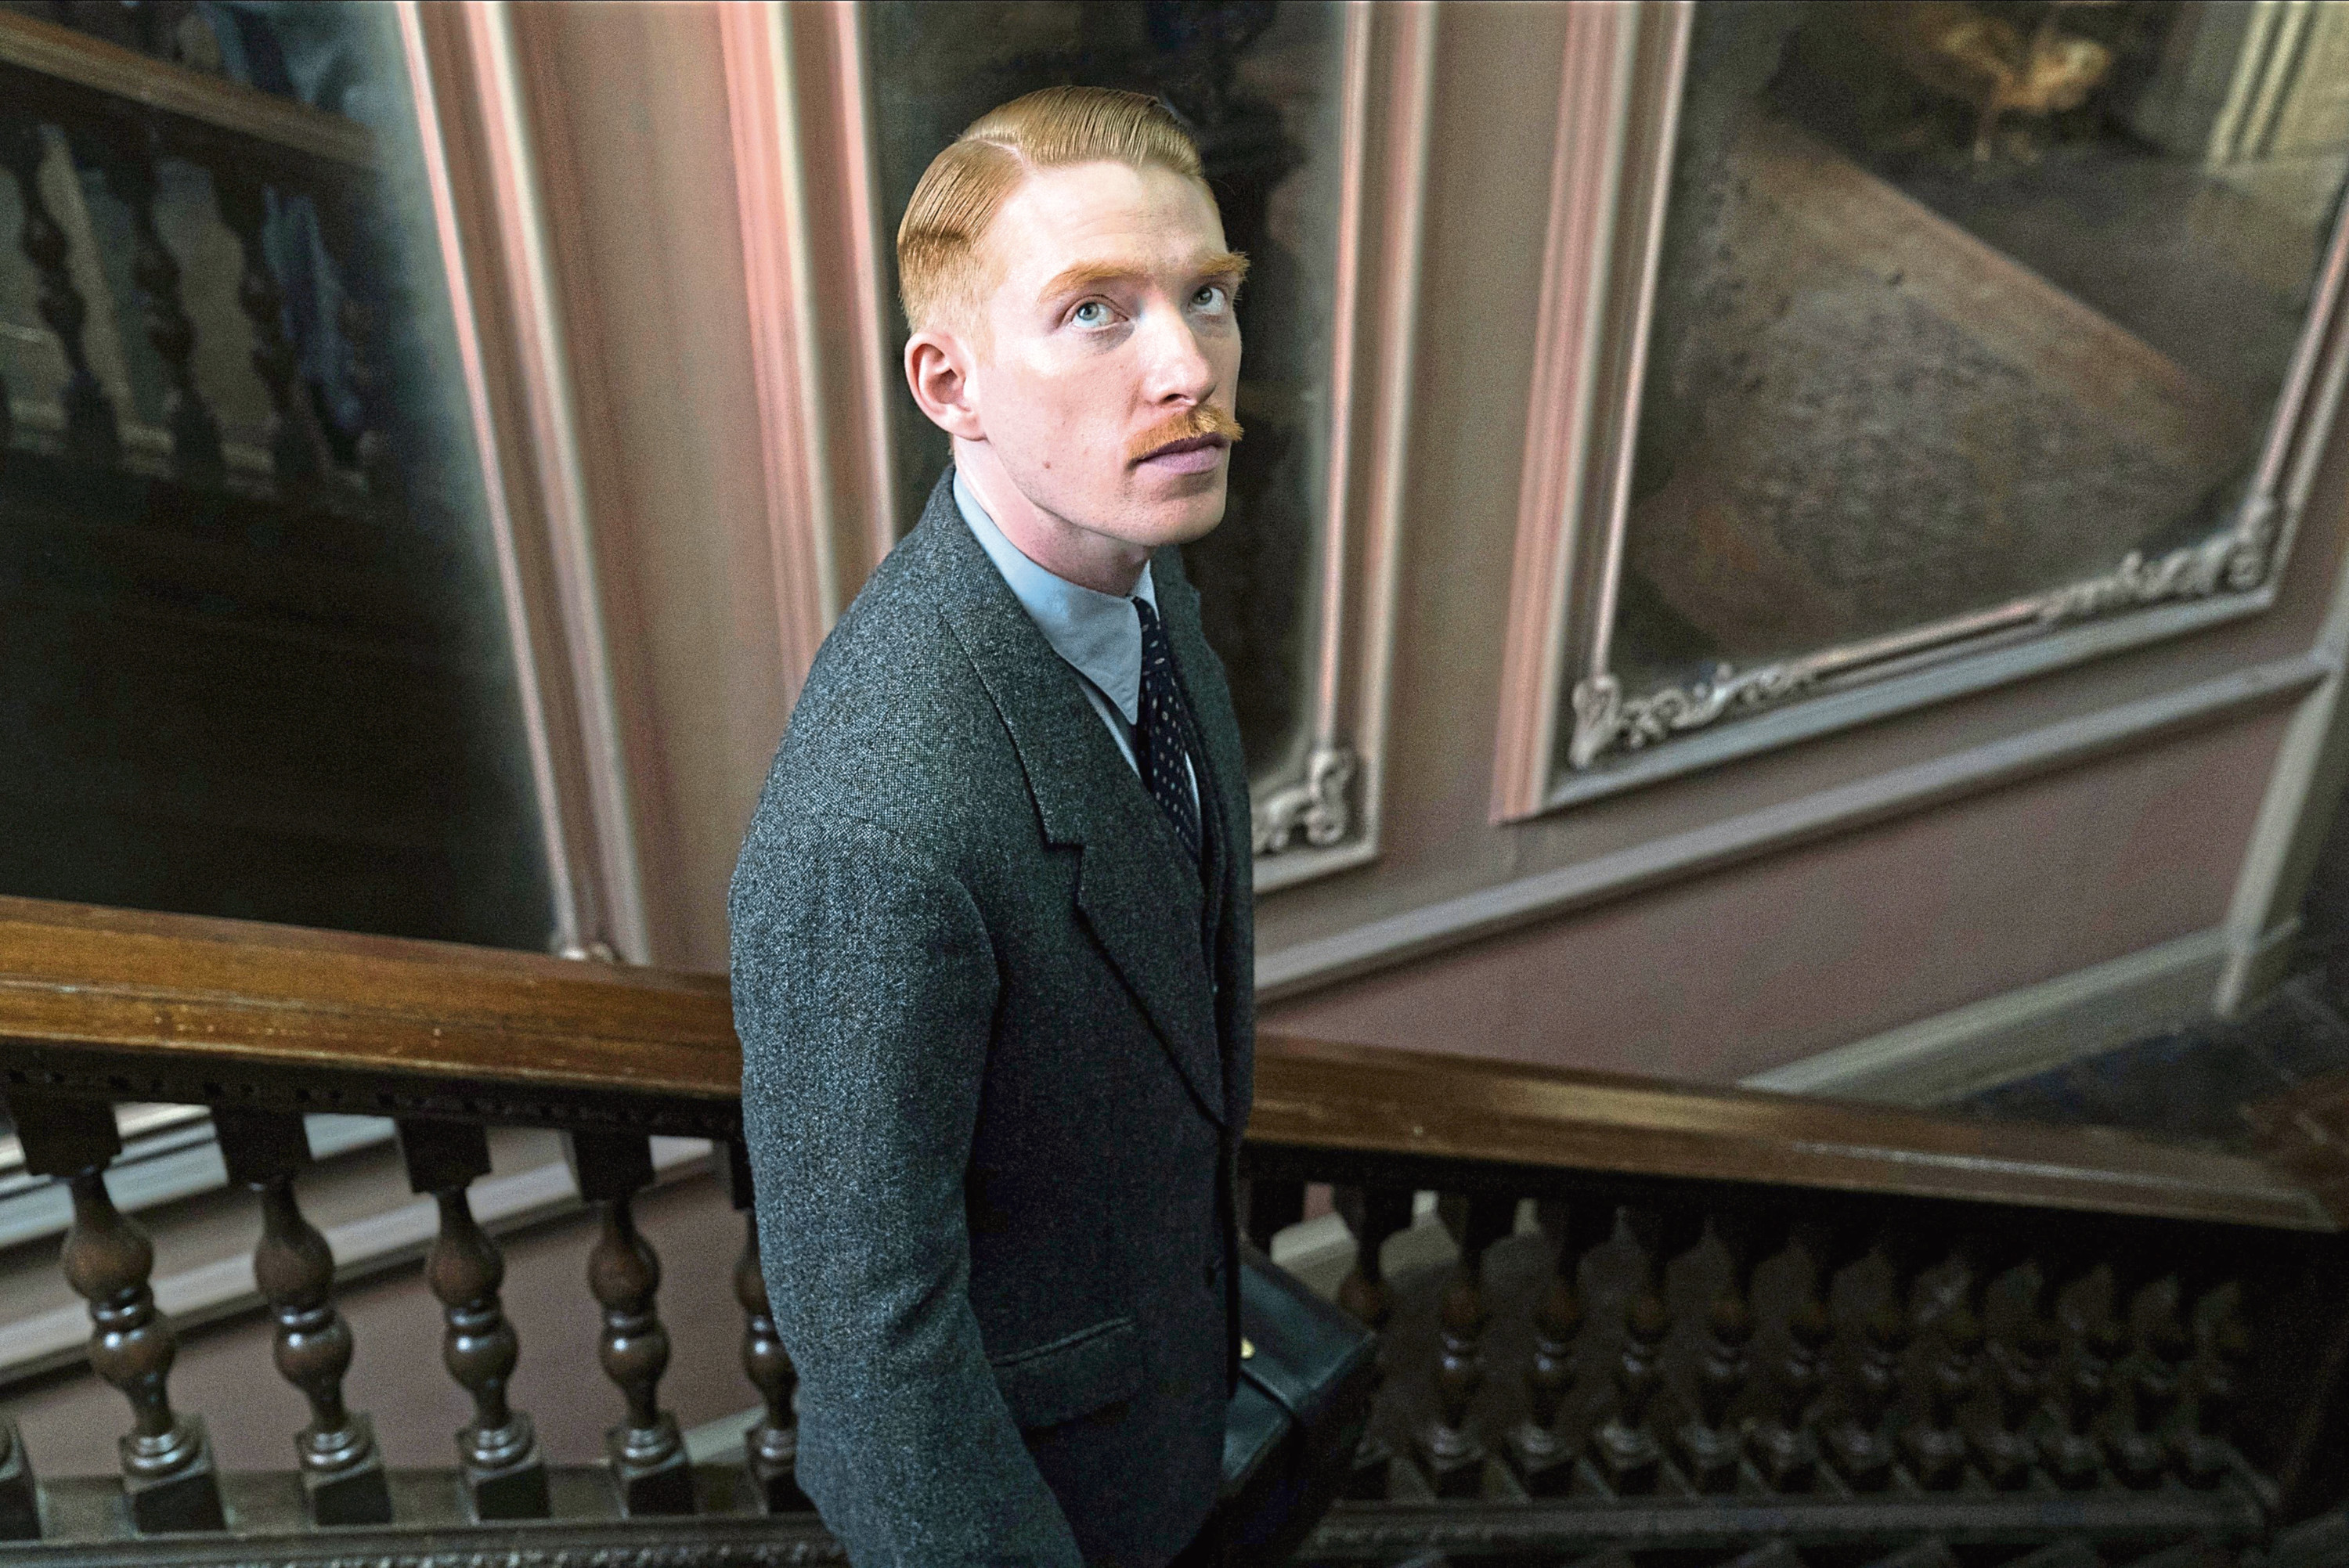 Domhnall Gleeson describes his character in The Little Stranger as a ticking timebomb